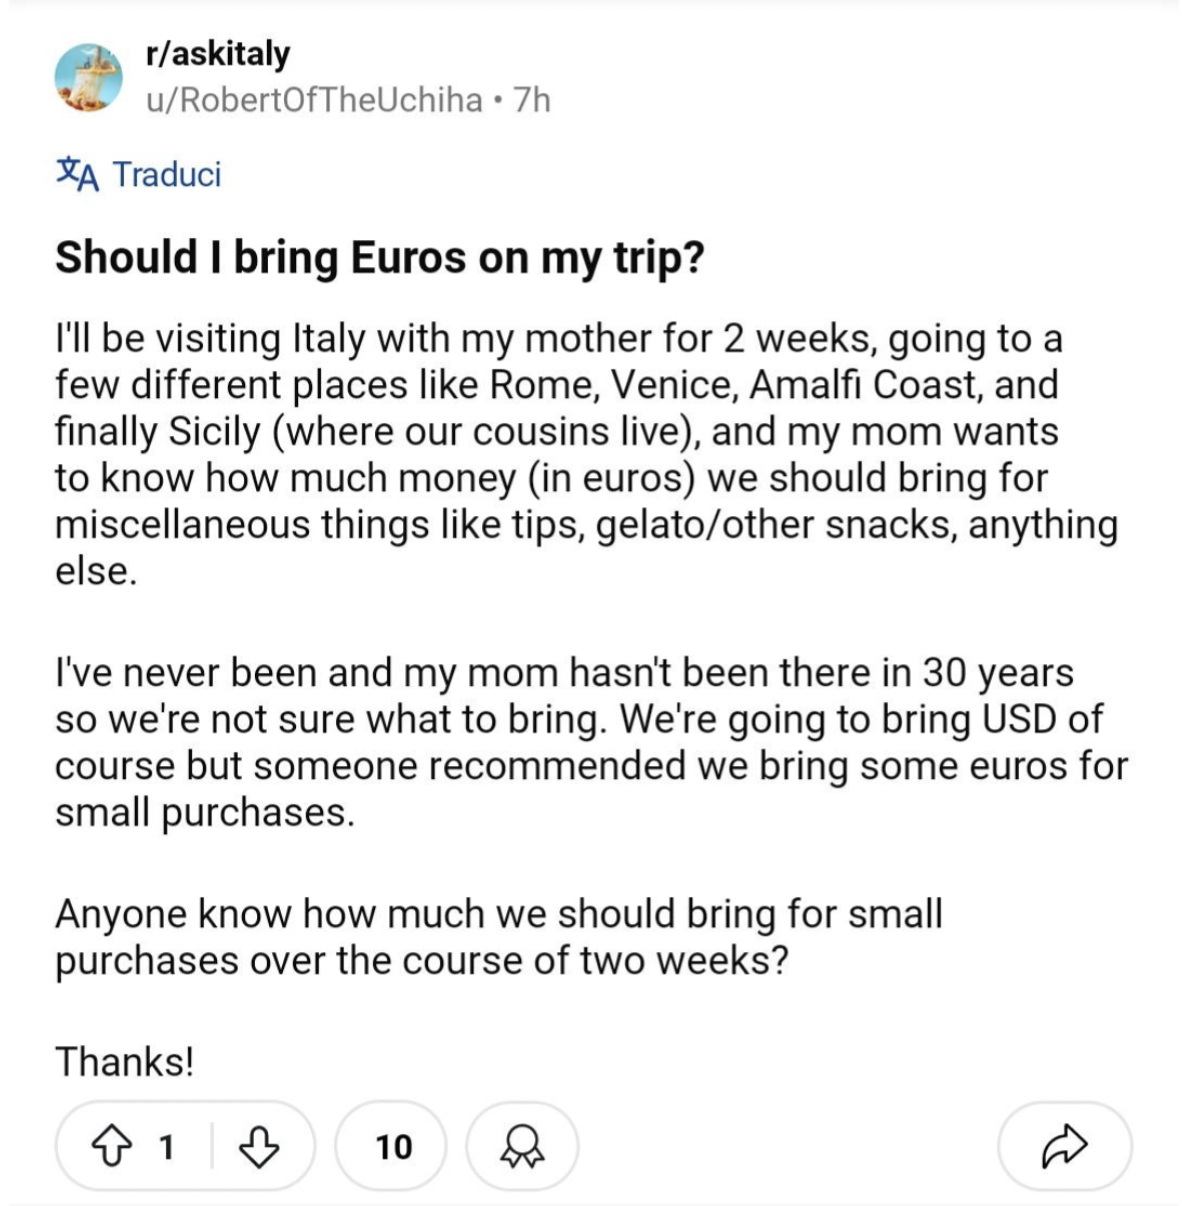 screenshot - raskitaly uRobertOfTheUchiha .7h A Traduci Should I bring Euros on my trip? I'll be visiting Italy with my mother for 2 weeks, going to a few different places Rome, Venice, Amalfi Coast, and finally Sicily where our cousins live, and my mom w